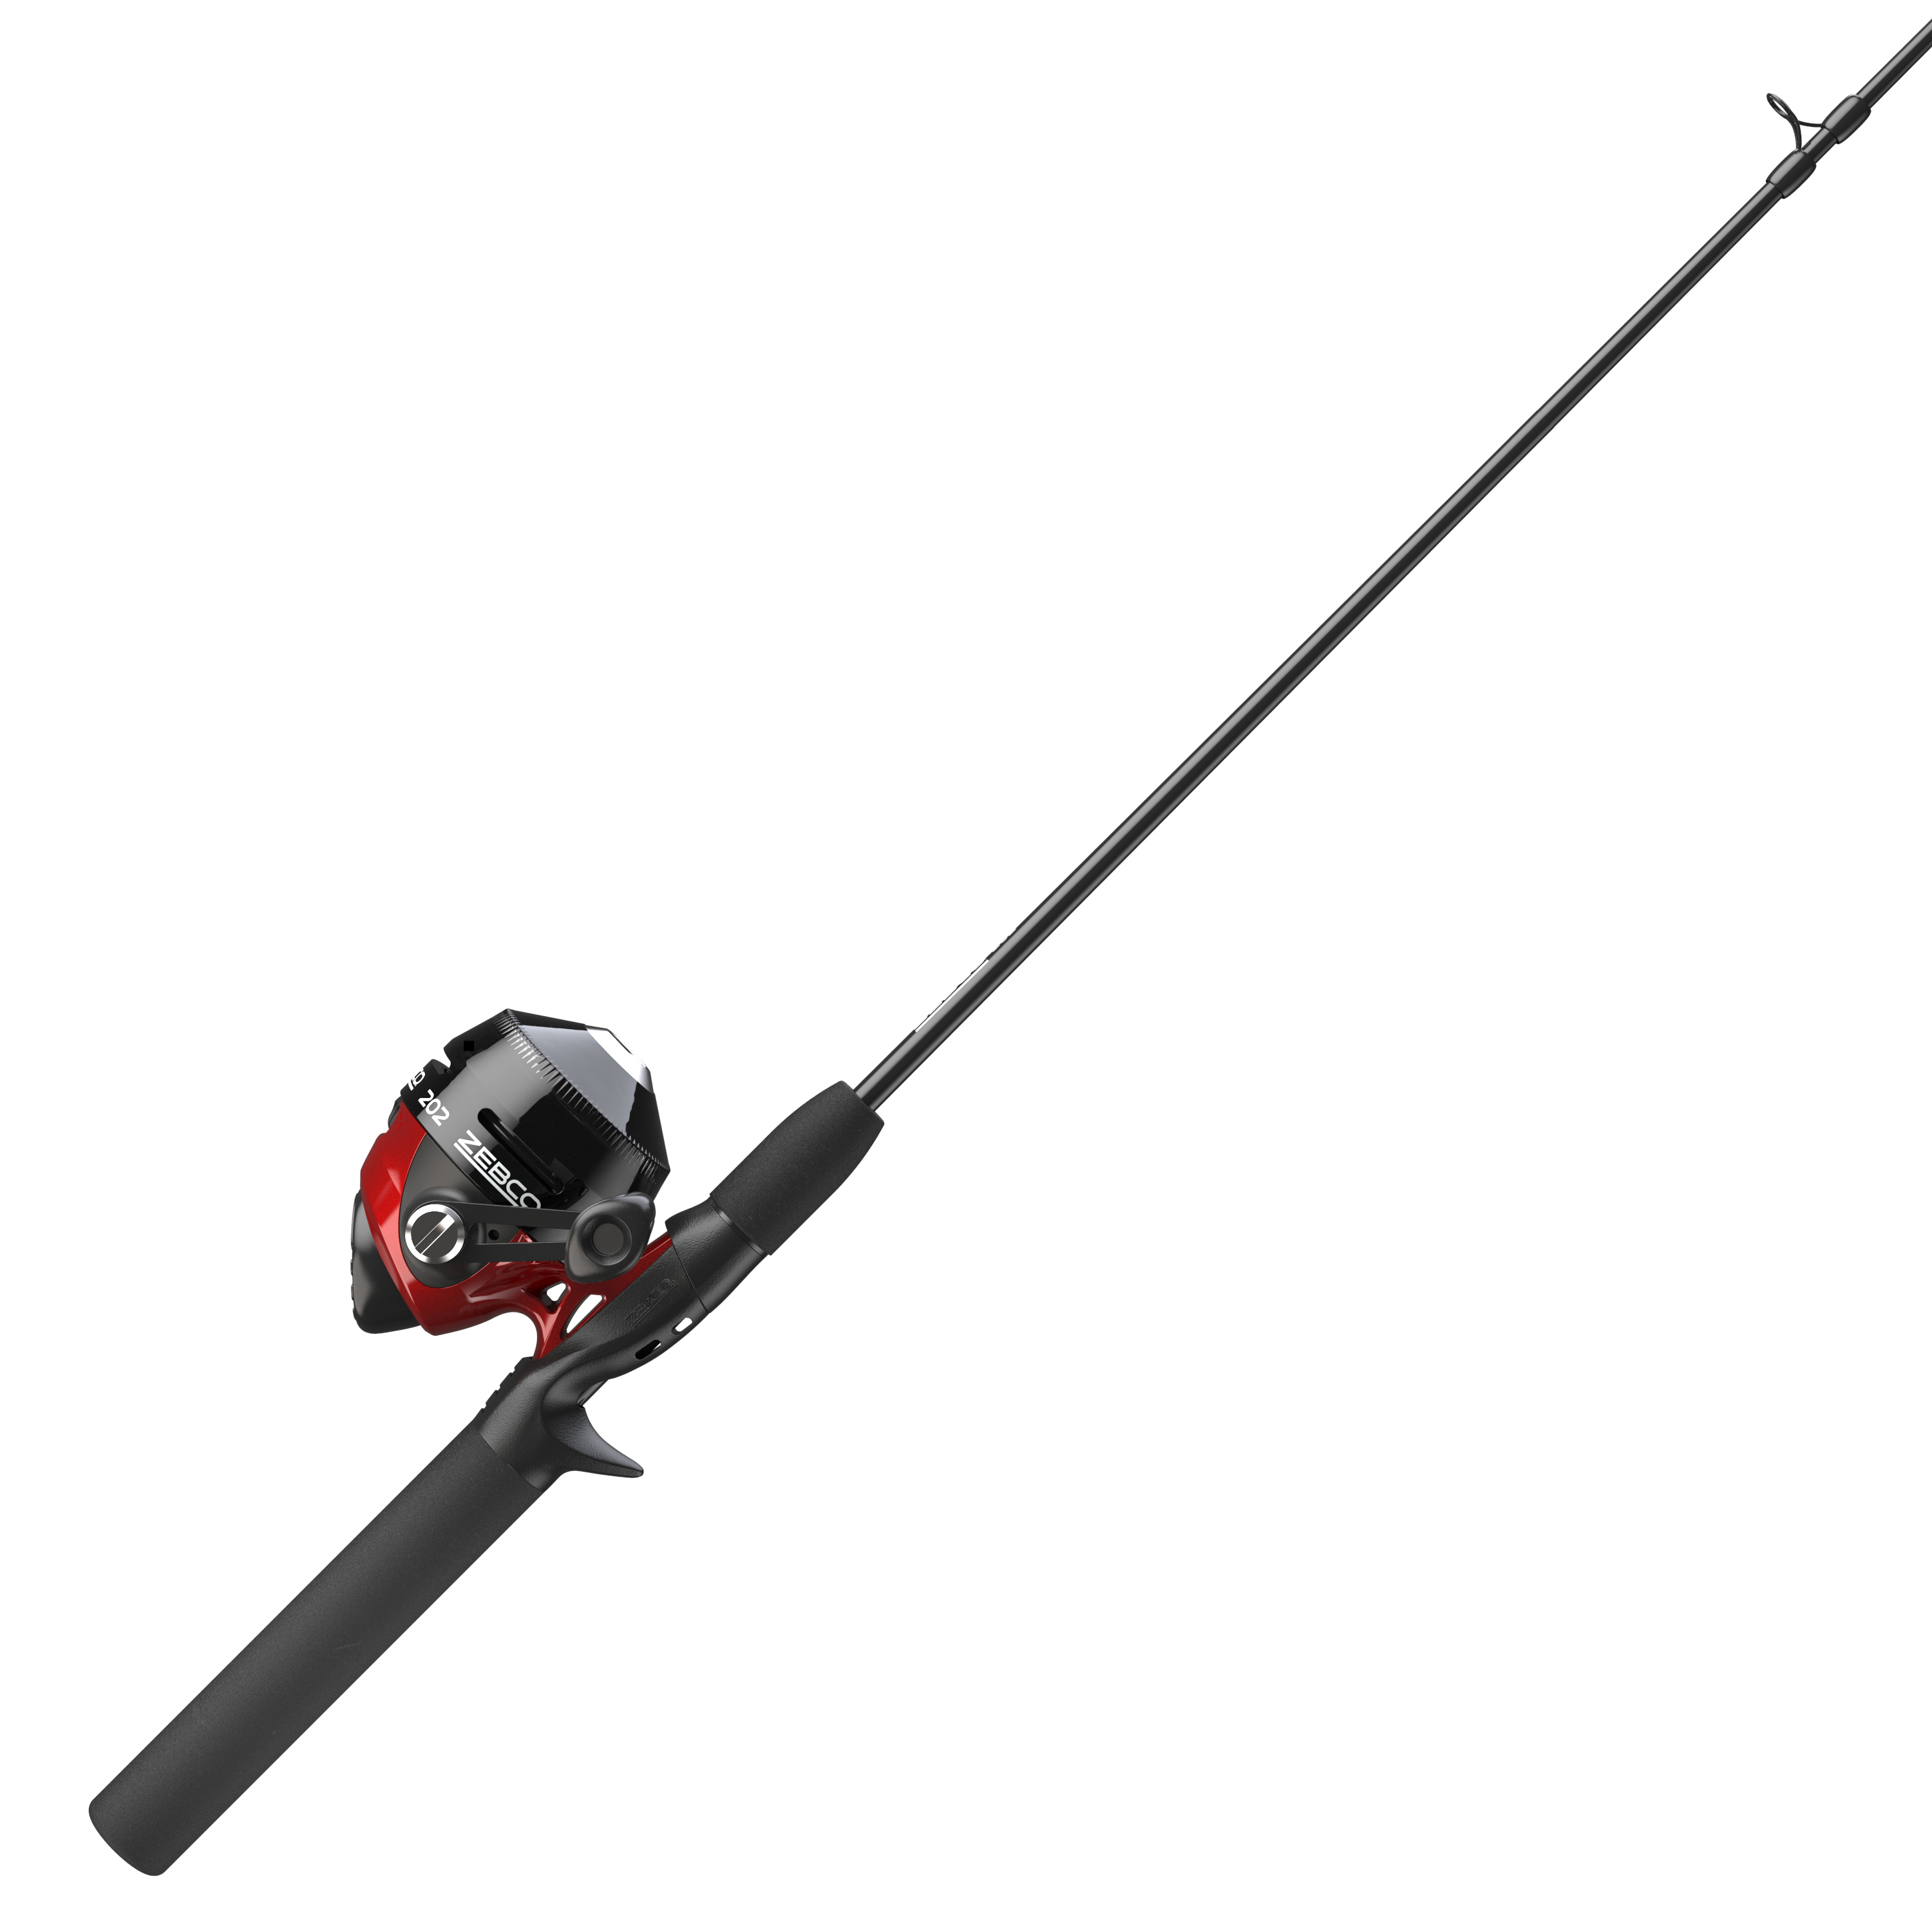  Zebco 202 & 404 Spincast Reels and Fishing Rod Combos (2-Pack),  5-Foot 6-Inch 2-Piece Fishing Pole, Size 30 and 40 Reels, Right-Hand  Retrieve, Pre-Spooled with 10 lb and 15 lb